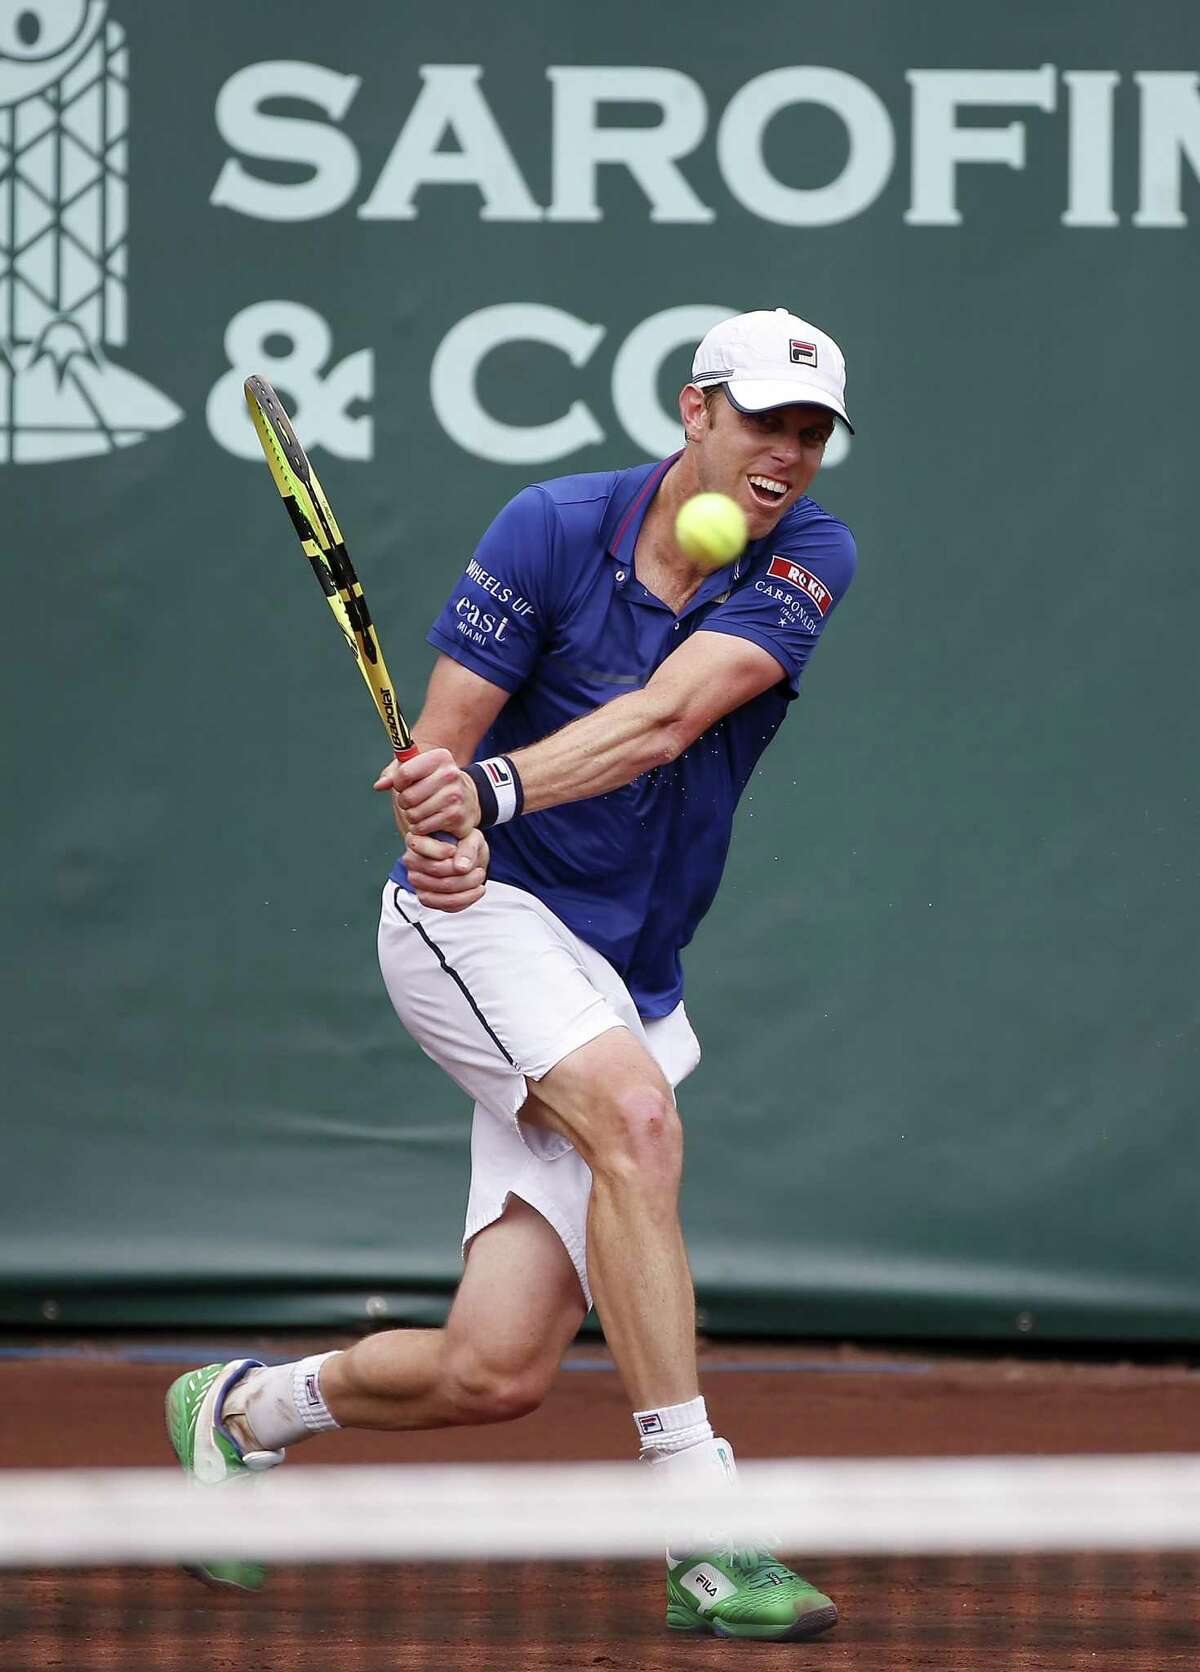 American Sam Querrey ousted Serbia’s Janko Tipsarevic in straight sets in the quarterfinals.